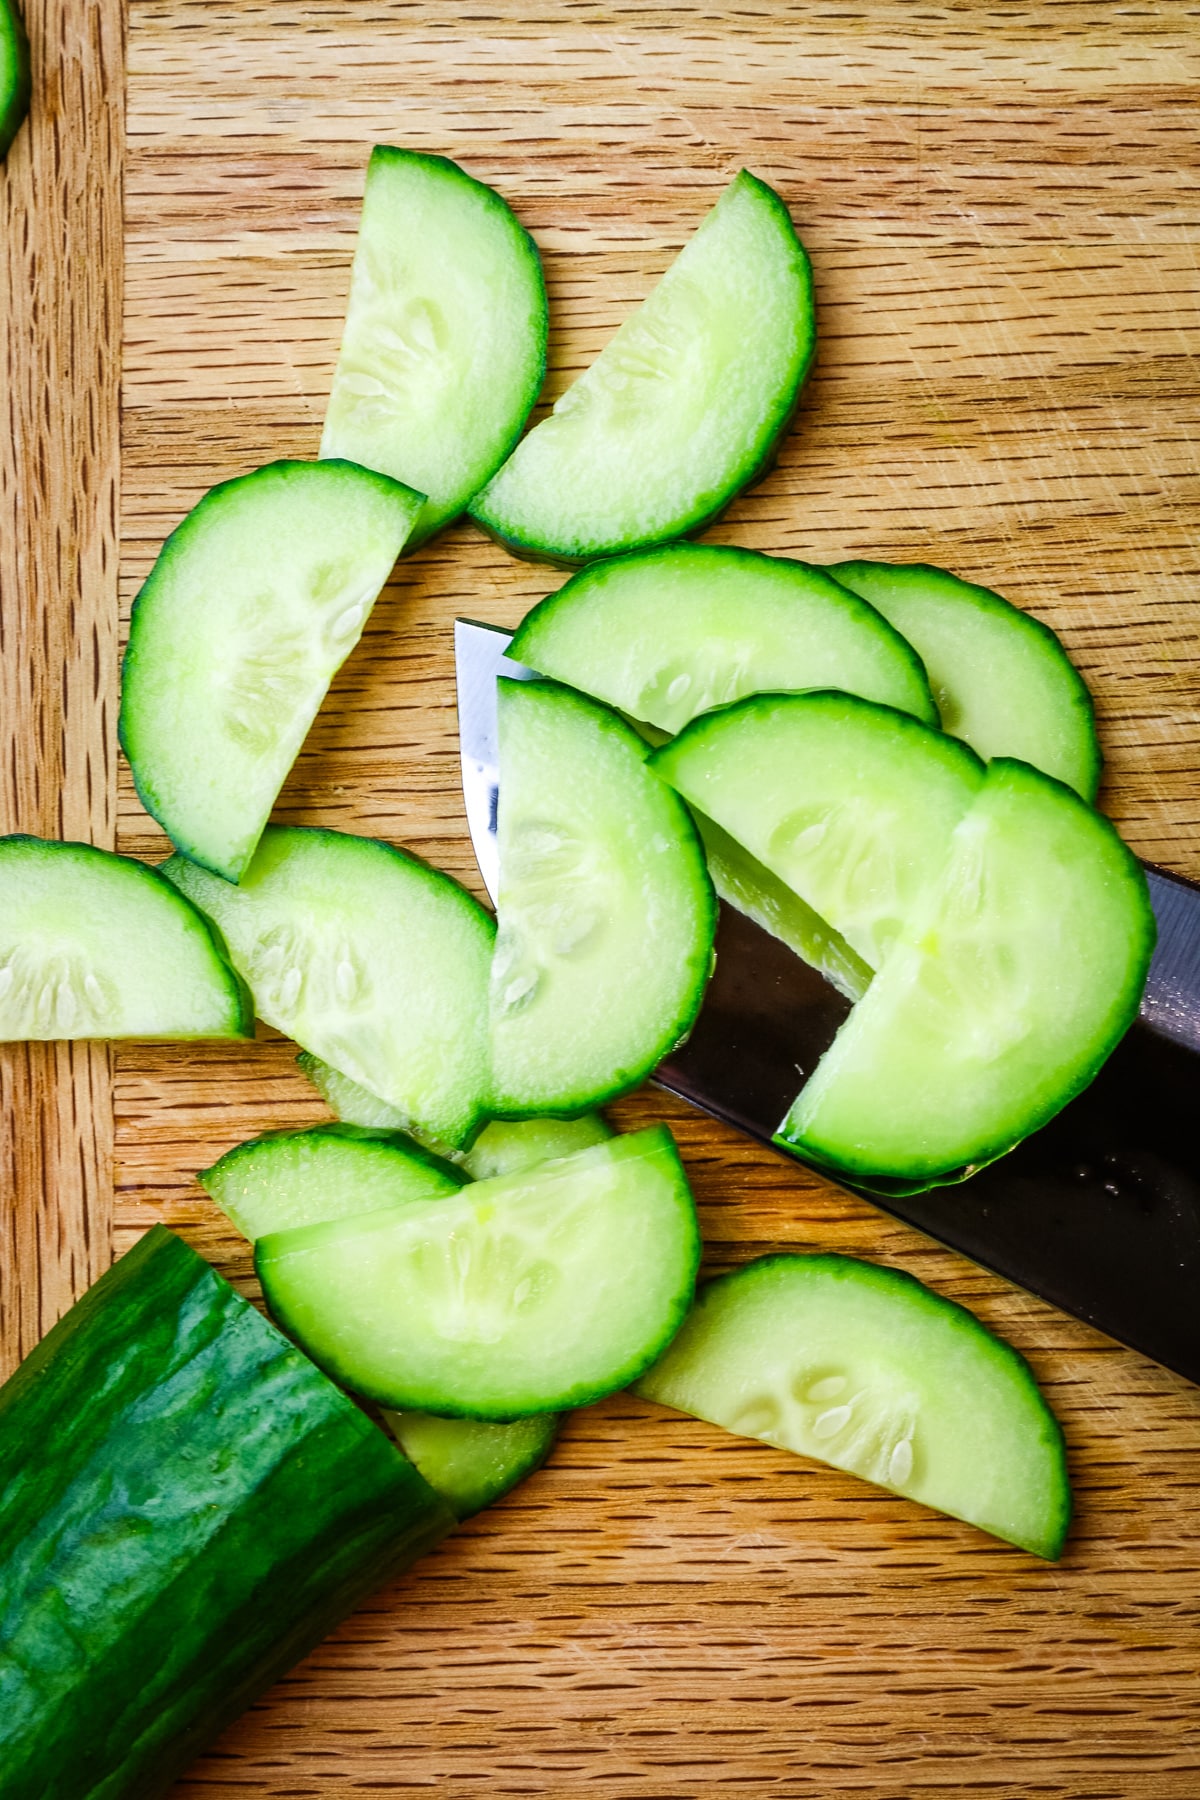 cucumber sliced into half-moons on cutting board.